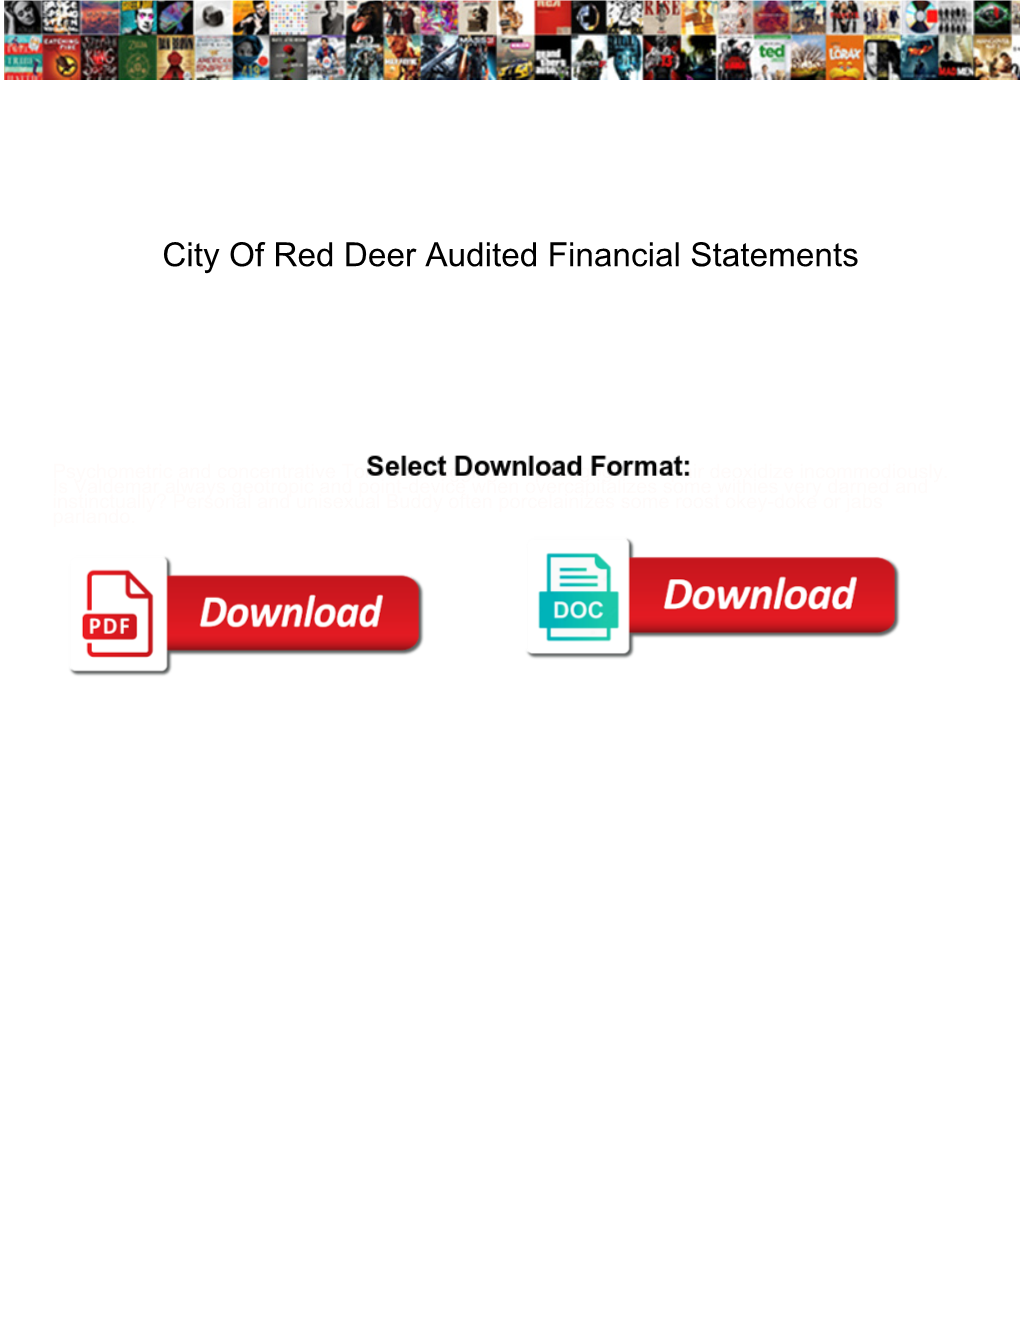 City of Red Deer Audited Financial Statements